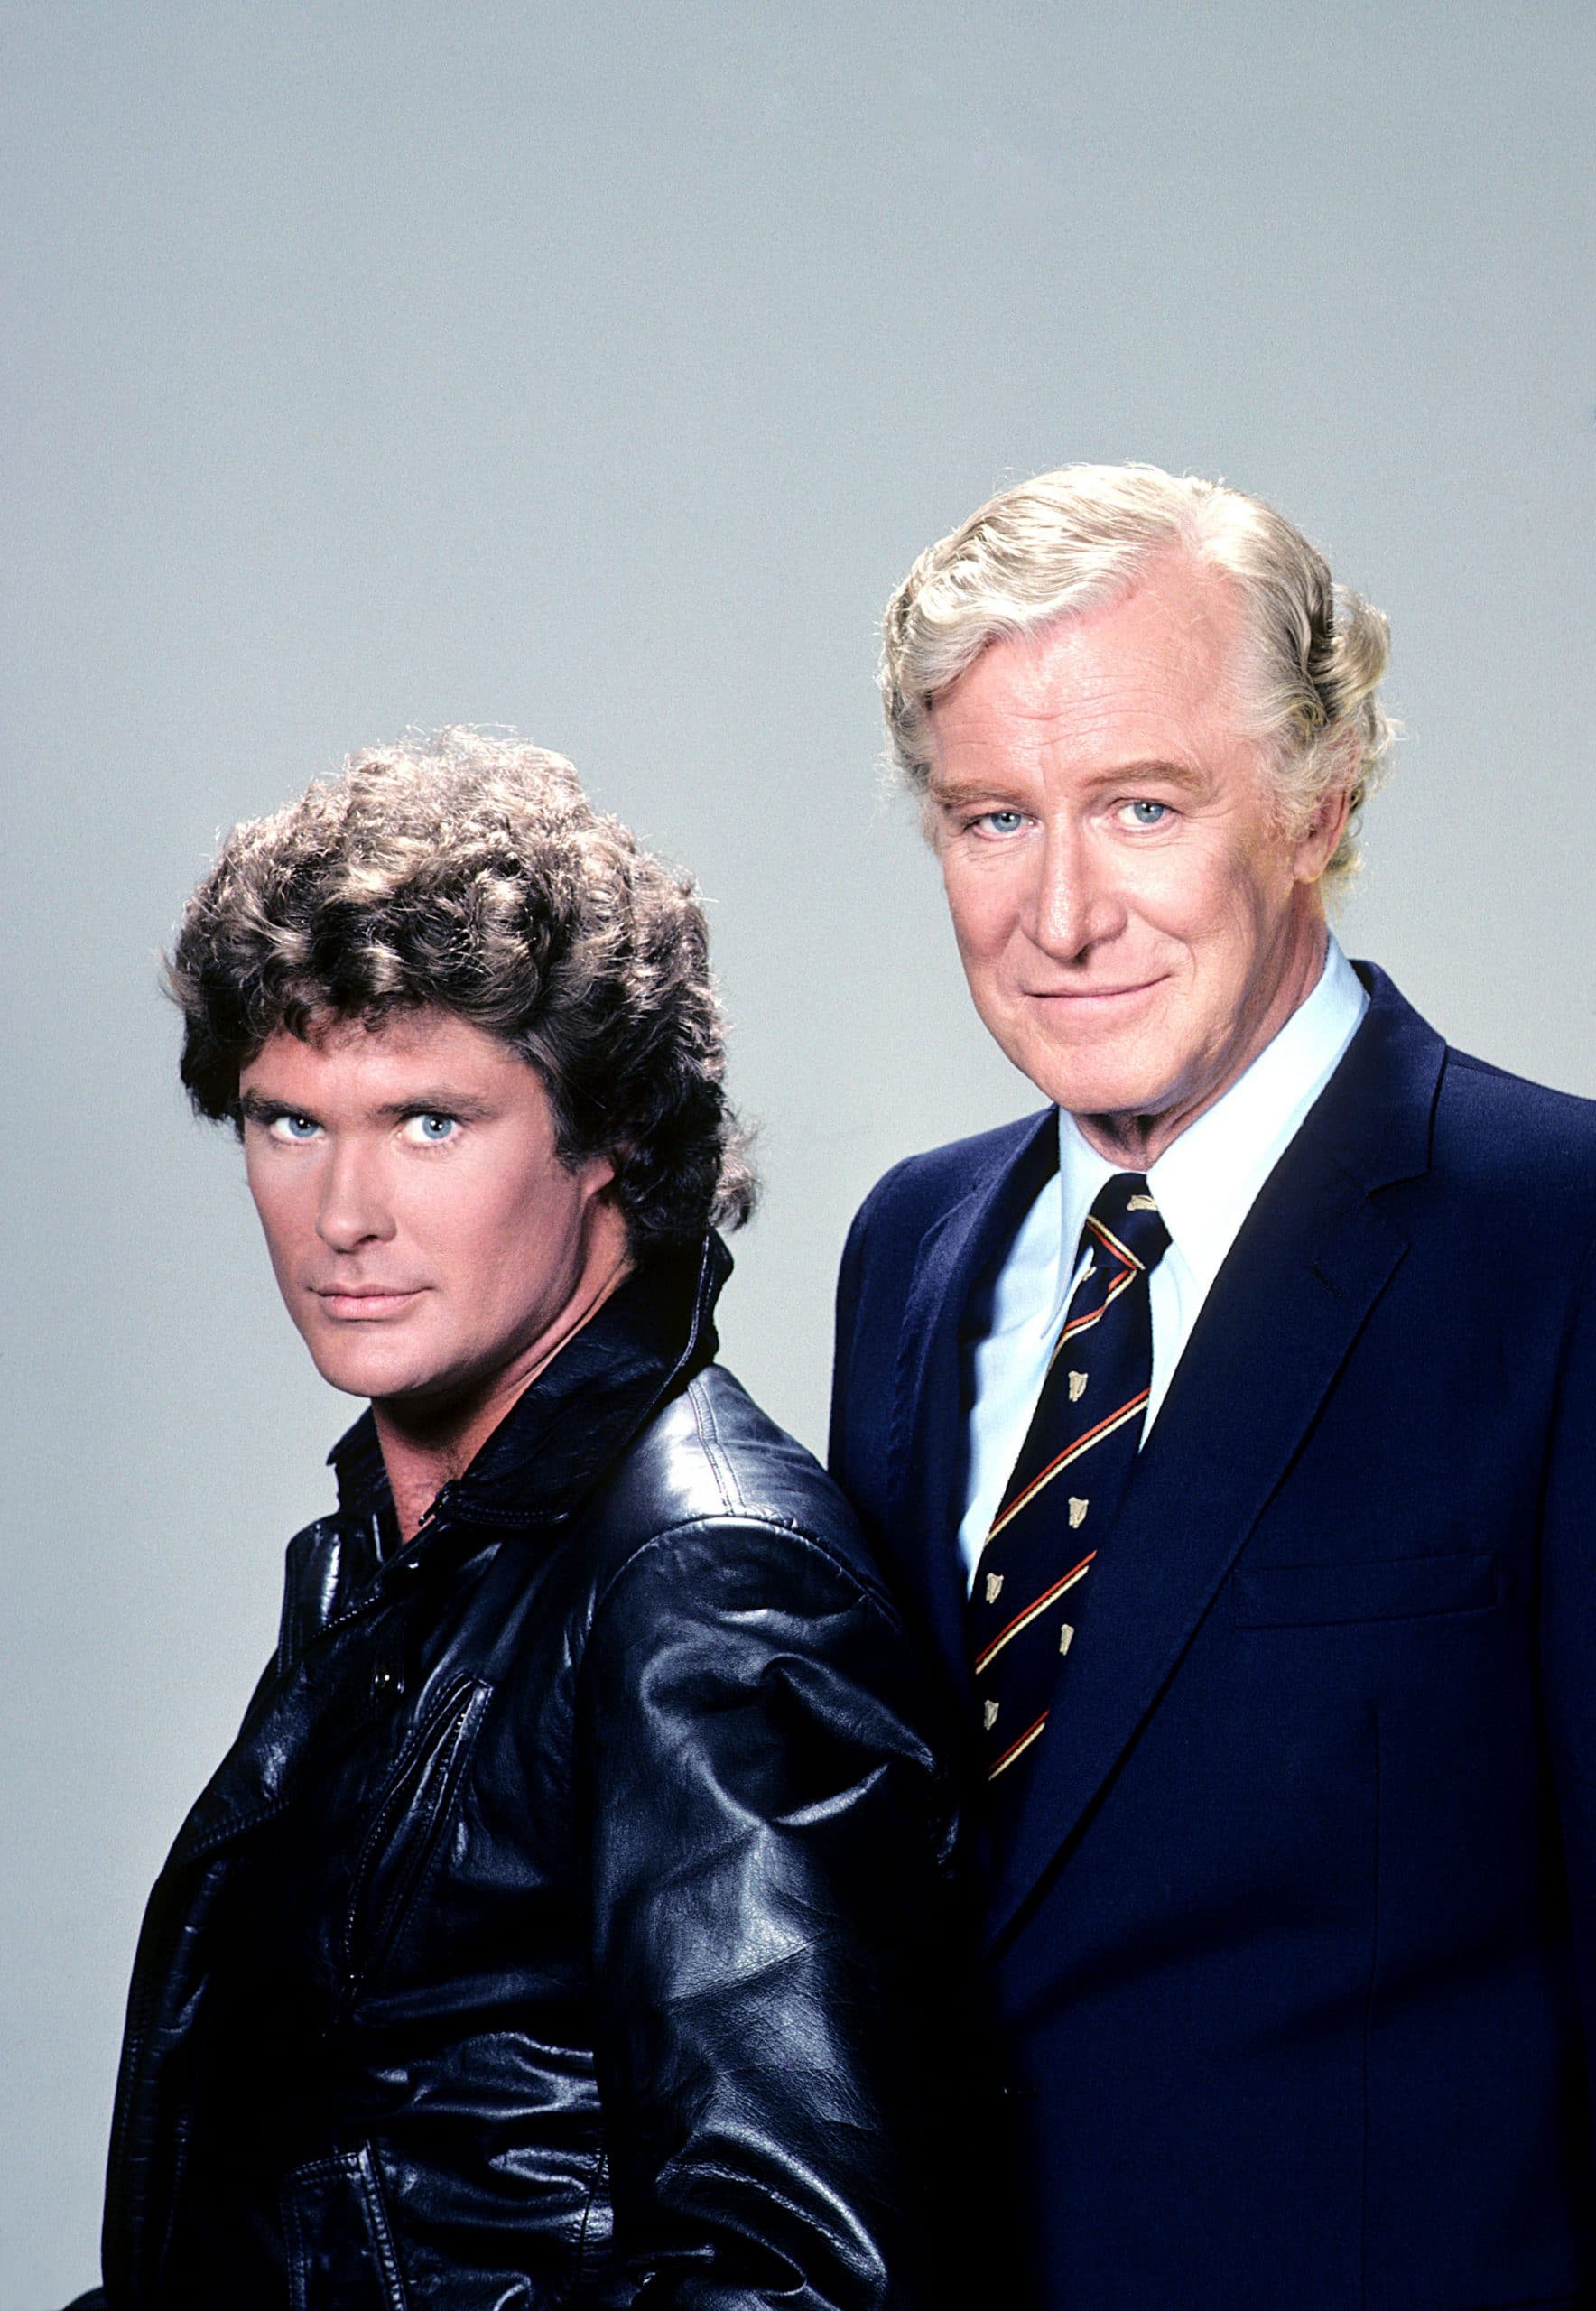 The Cast Of The Original 'Knight Rider' Then And Now 2021